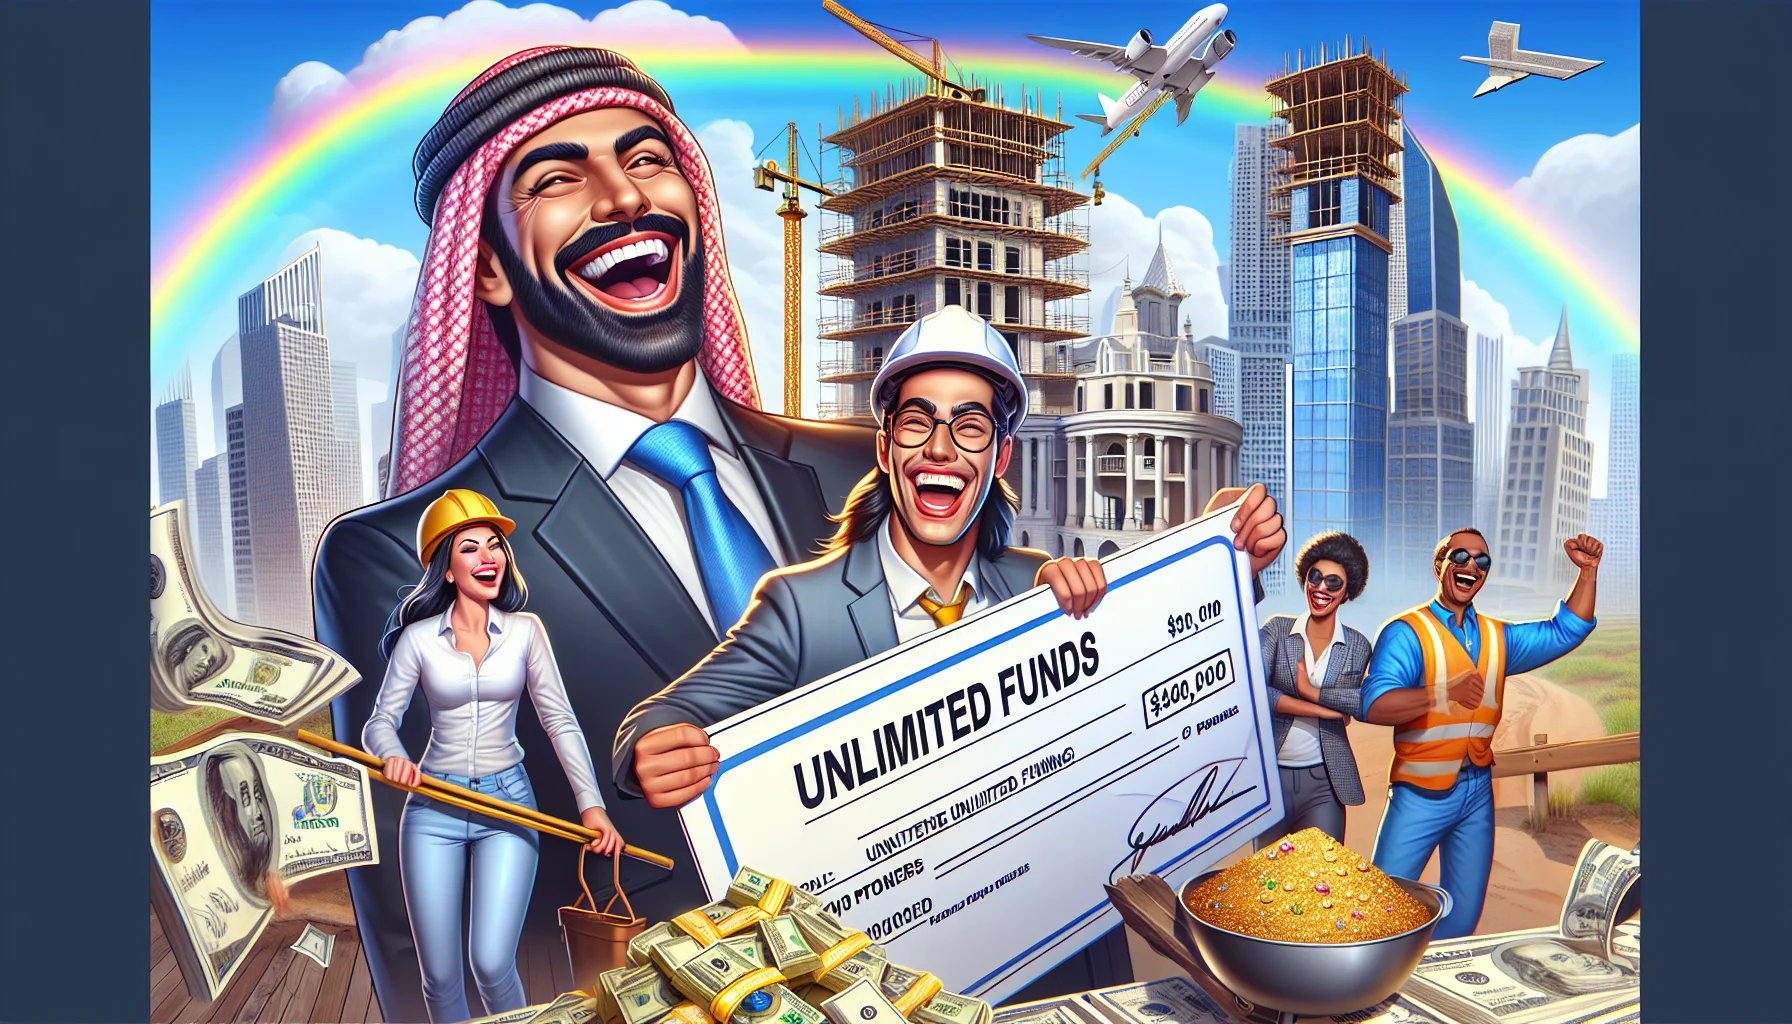 Imagine a perfect world of real estate funding in a comical fashion. Picture a Middle Eastern male banker with a striking grin, holding an oversized cheque in his hands with 'Unlimited Funds' written boldly. Beside him is a jovial Hispanic female architect holding blueprints for an extravagant property, and a South Asian female construction worker wearing a hard hat, laughing while pushing a wheelbarrow full of gold and precious stones as the building materials. In the background, buildings are rising almost instantly on a sunny day with a rainbow across the clear blue sky.